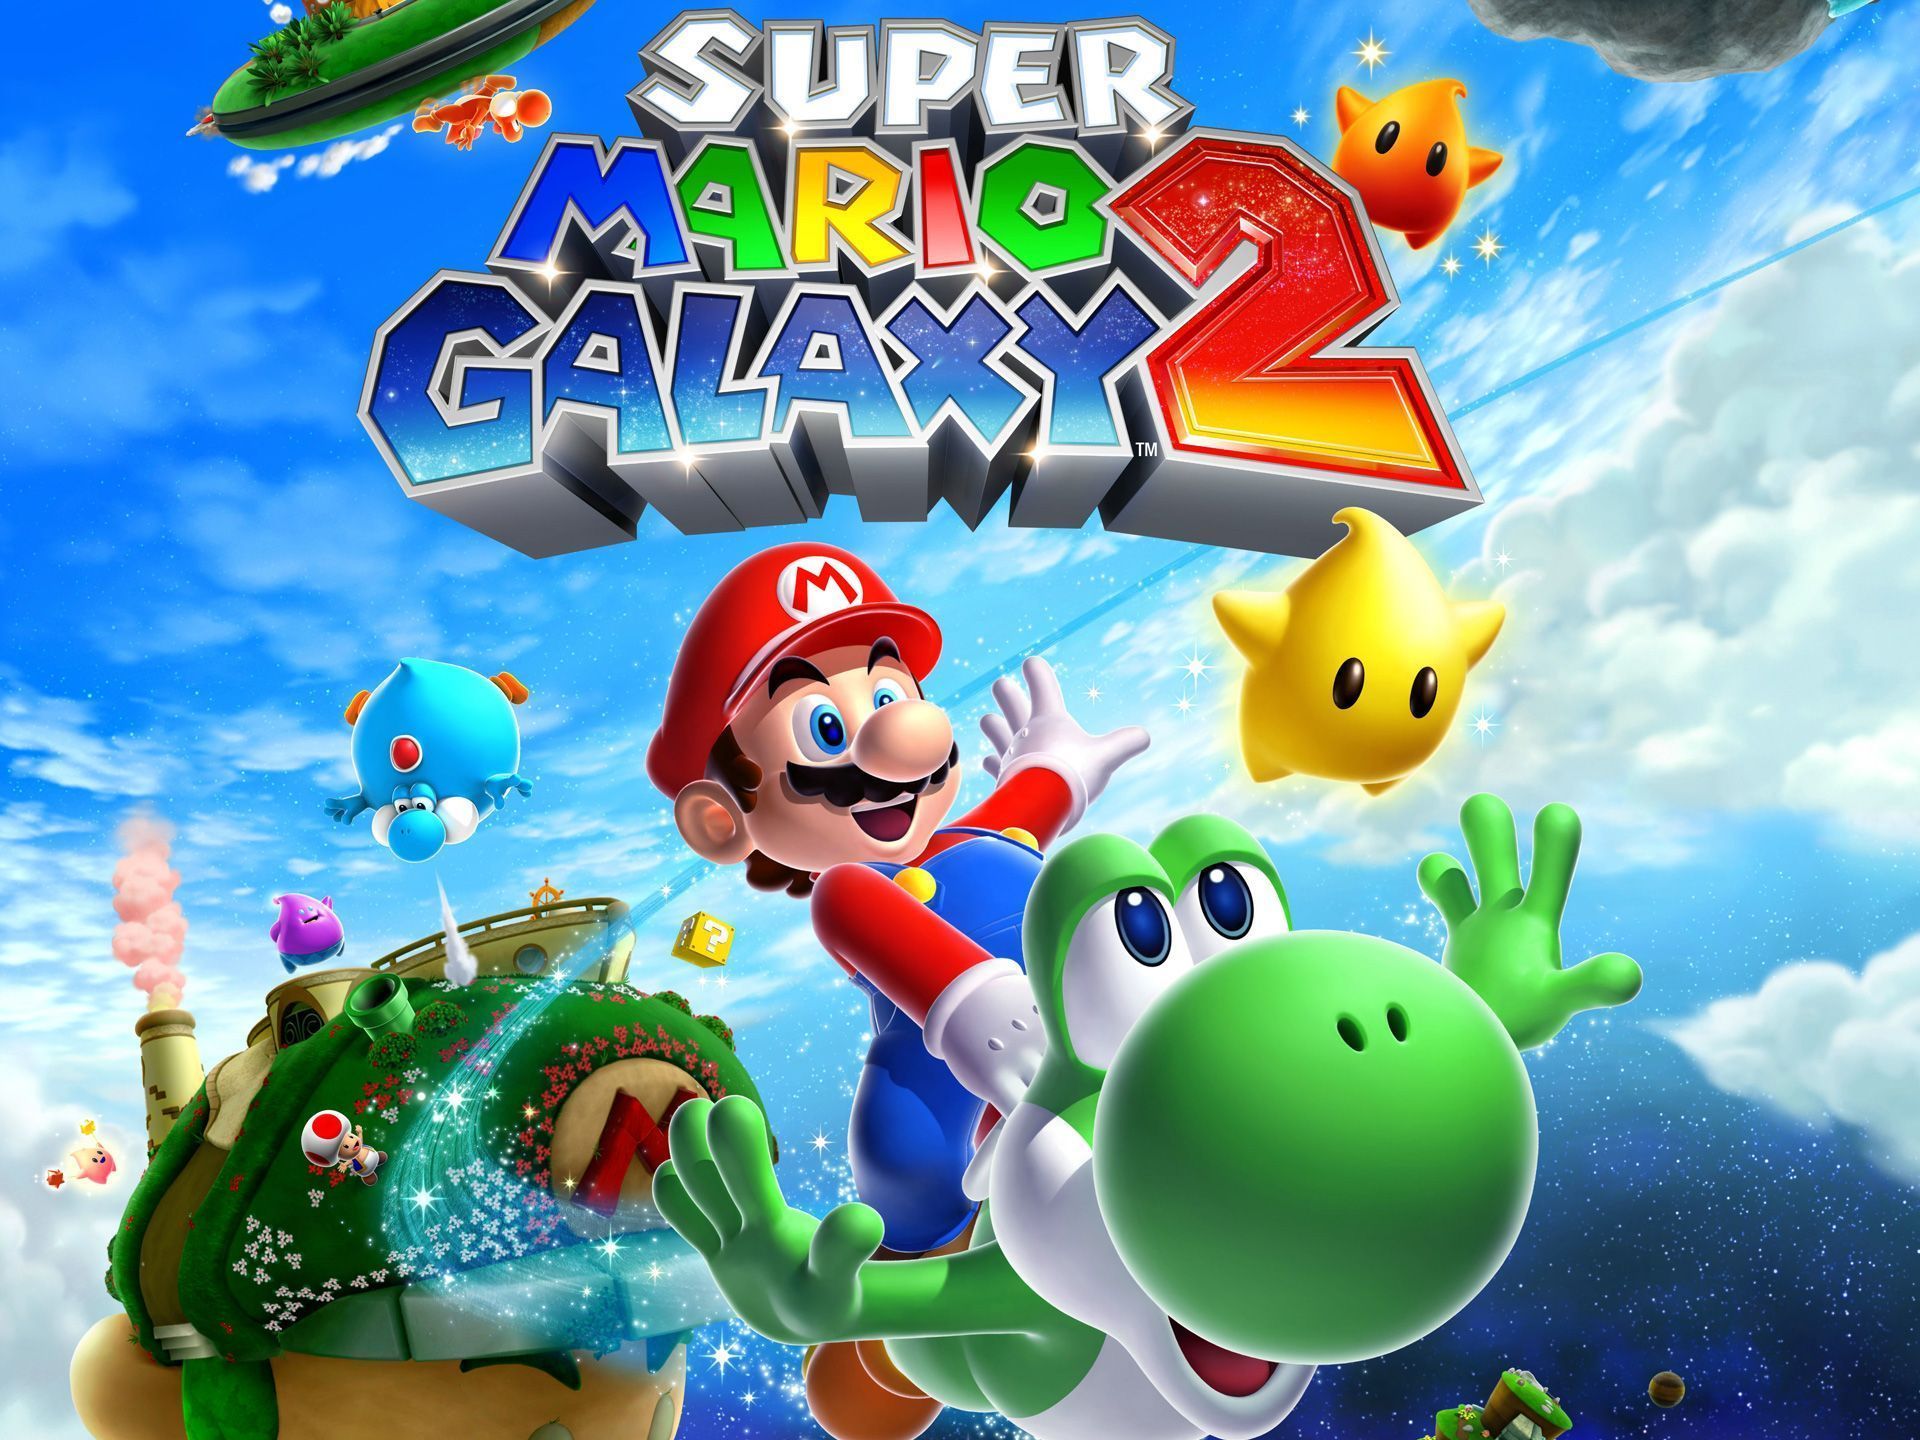 Super Mario Galaxy 2 Wallpapers HD Backgrounds